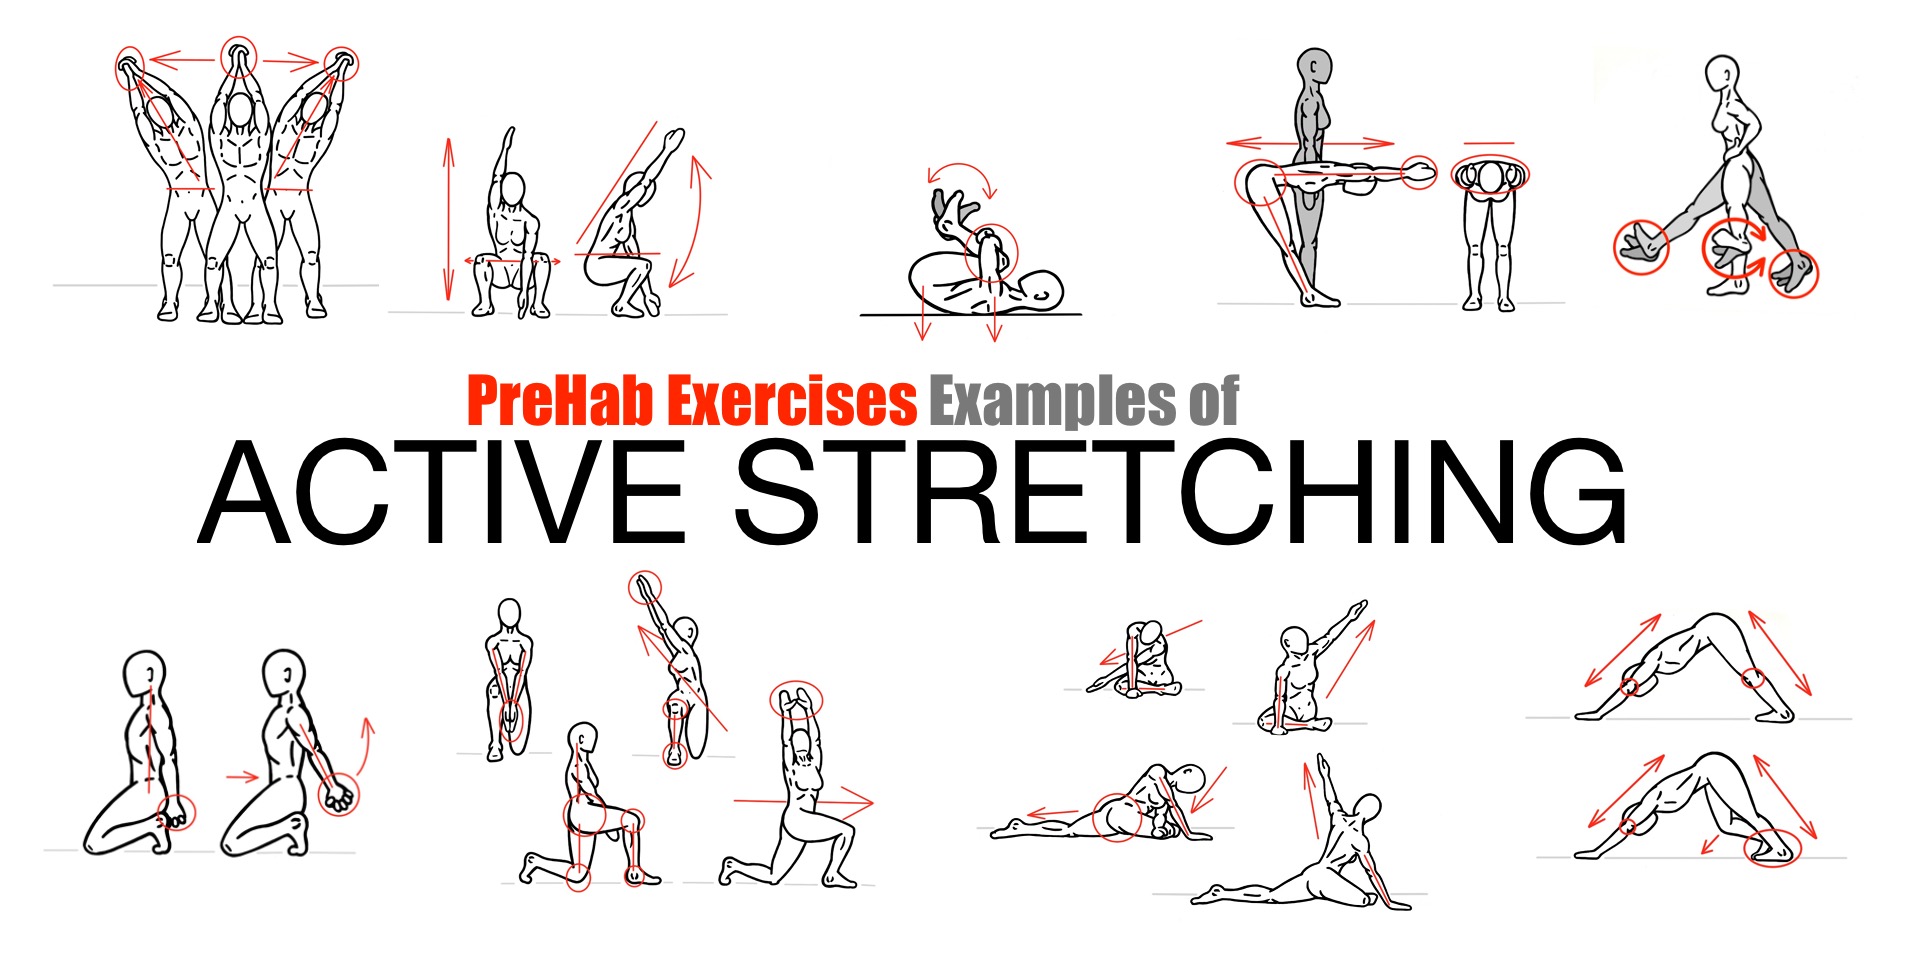 Dynamic Stretches - Leg Swings and Shoulder Dislocates Examples